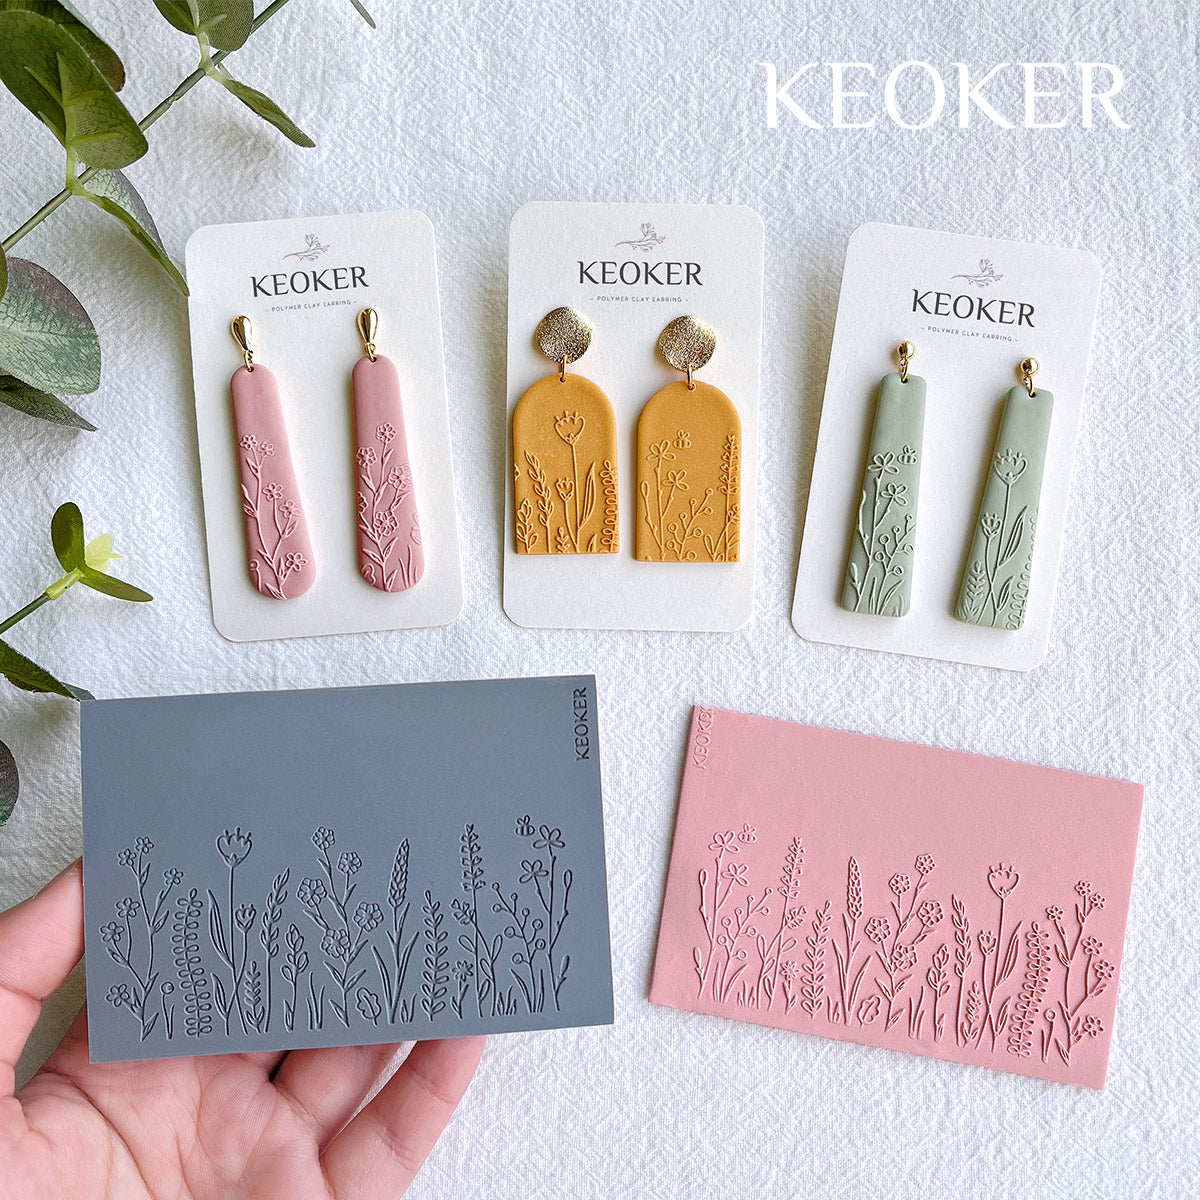 KEOKER Polymer Clay Texture Roller(3 Sample Pack)